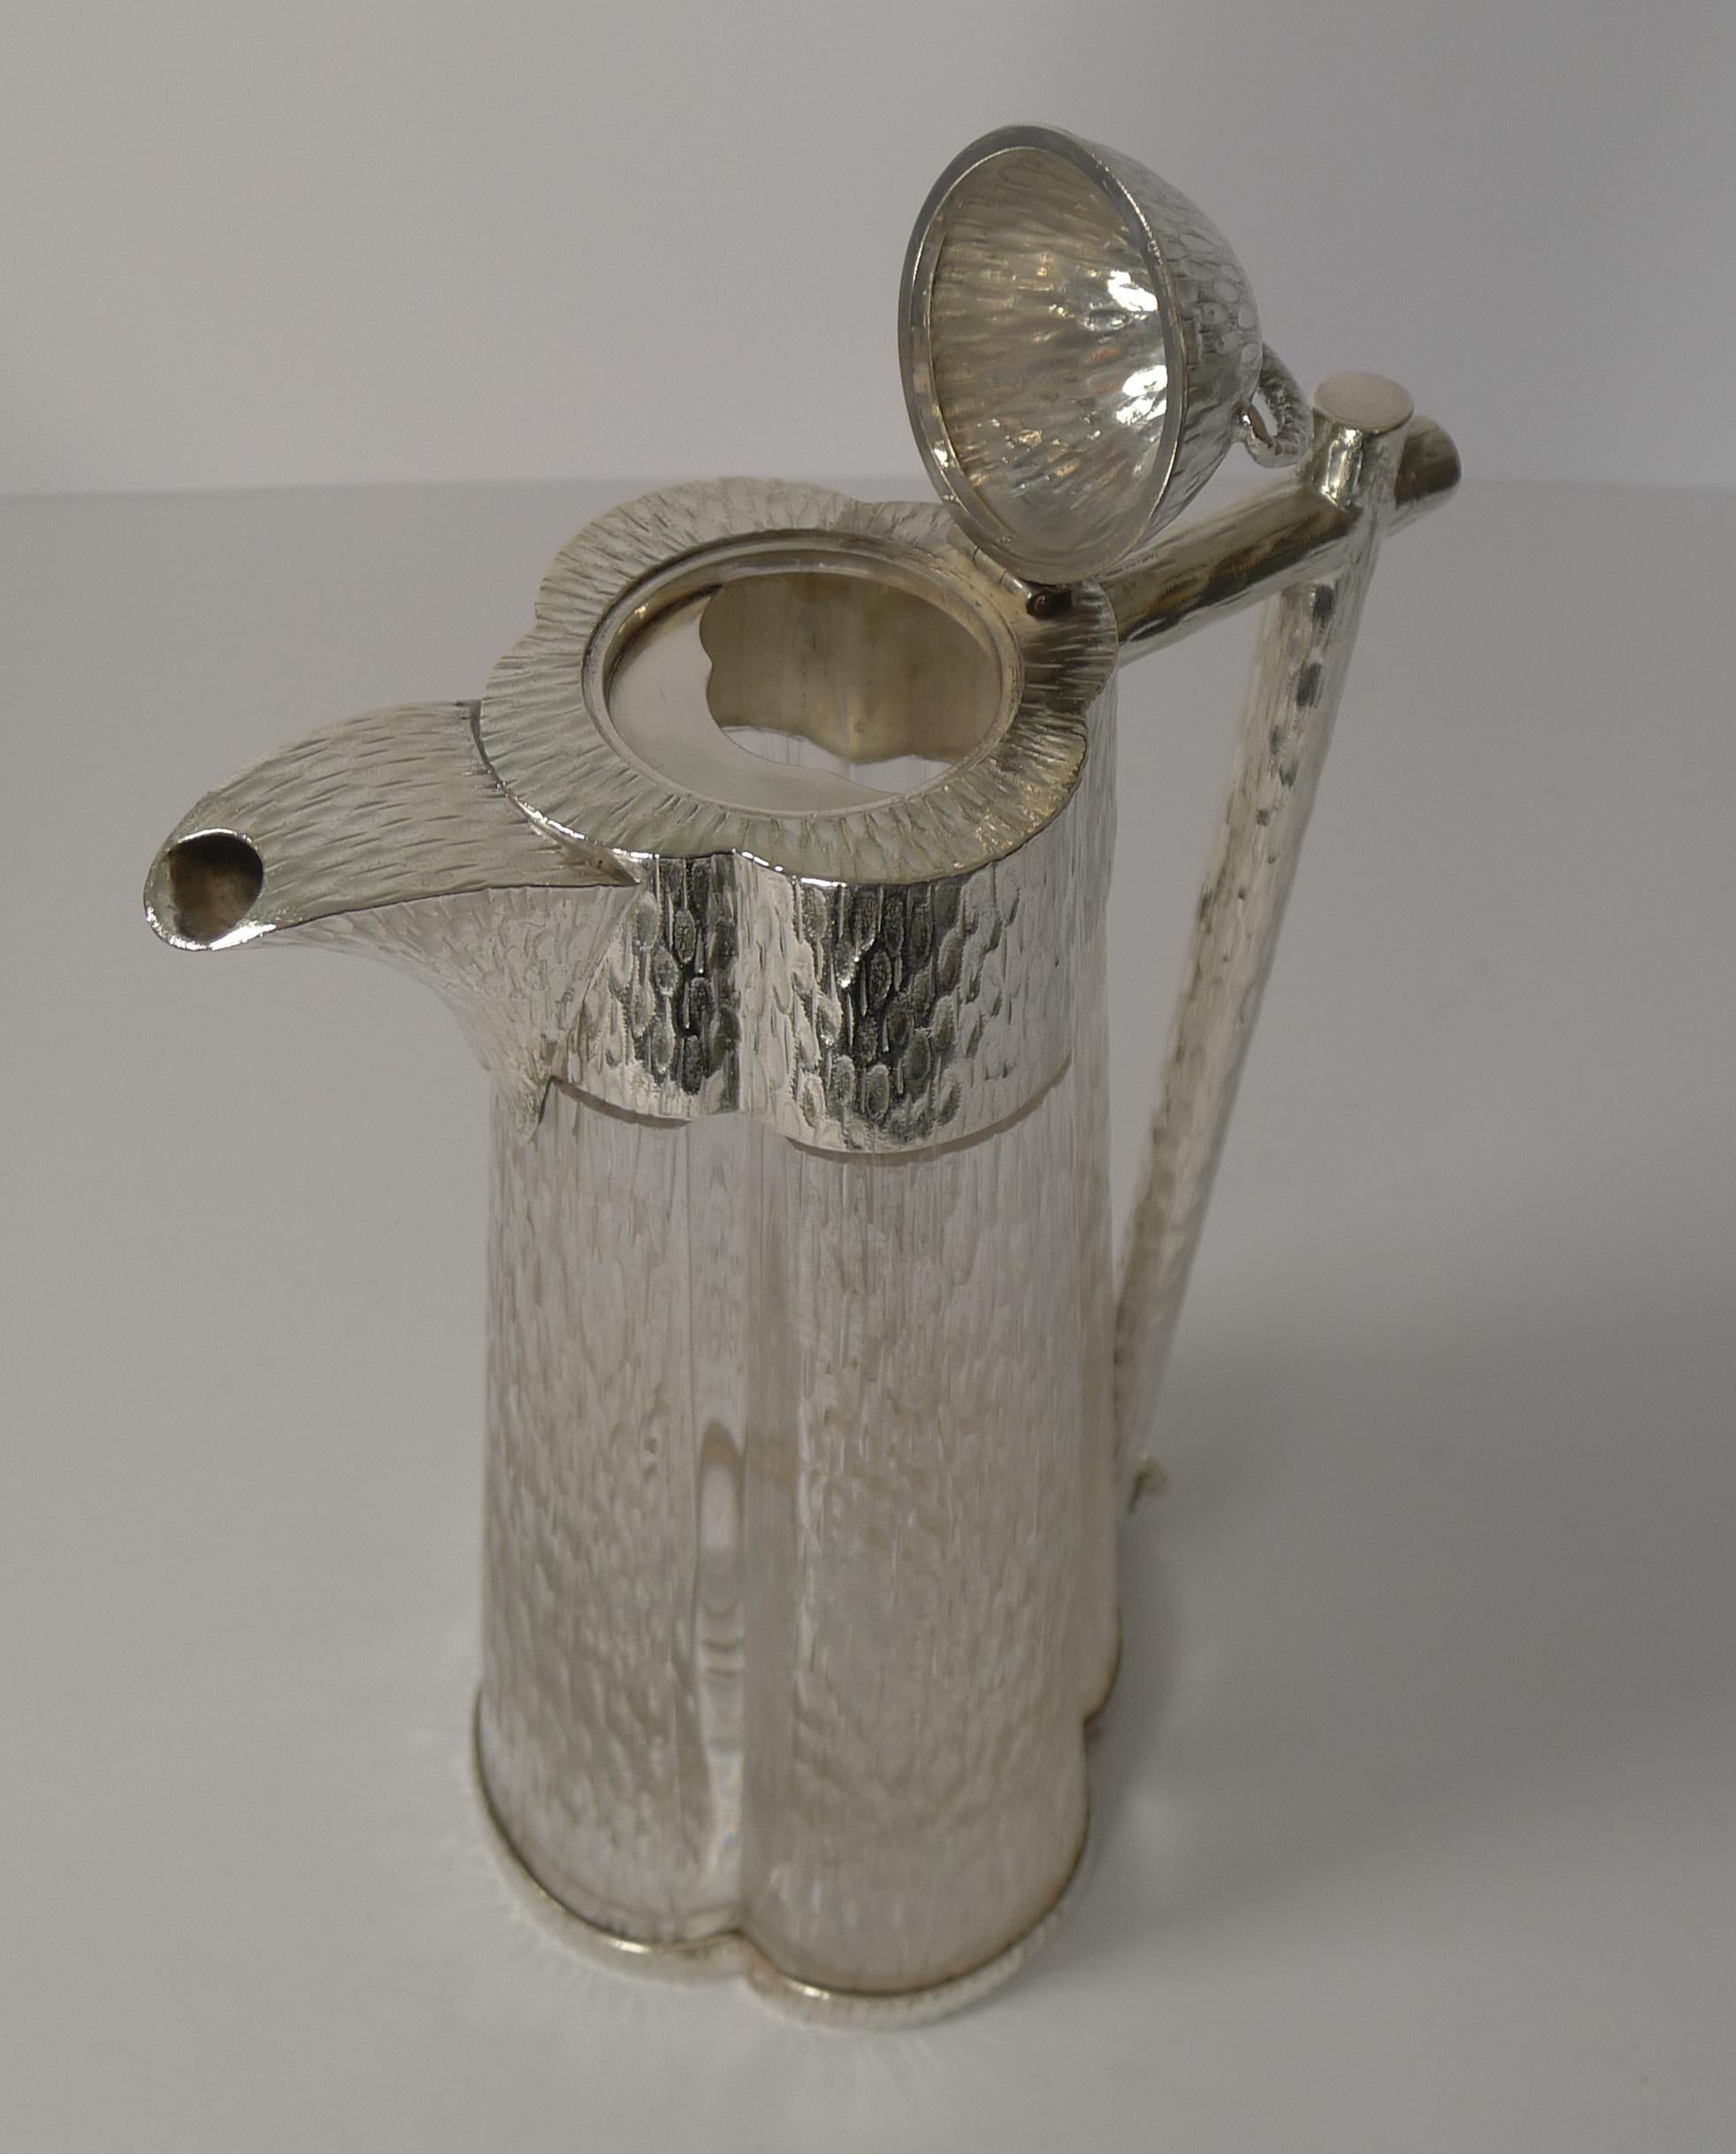 Aesthetic Movement Outstanding Claret Jug in the Manner of Christopher Dresser, 1893